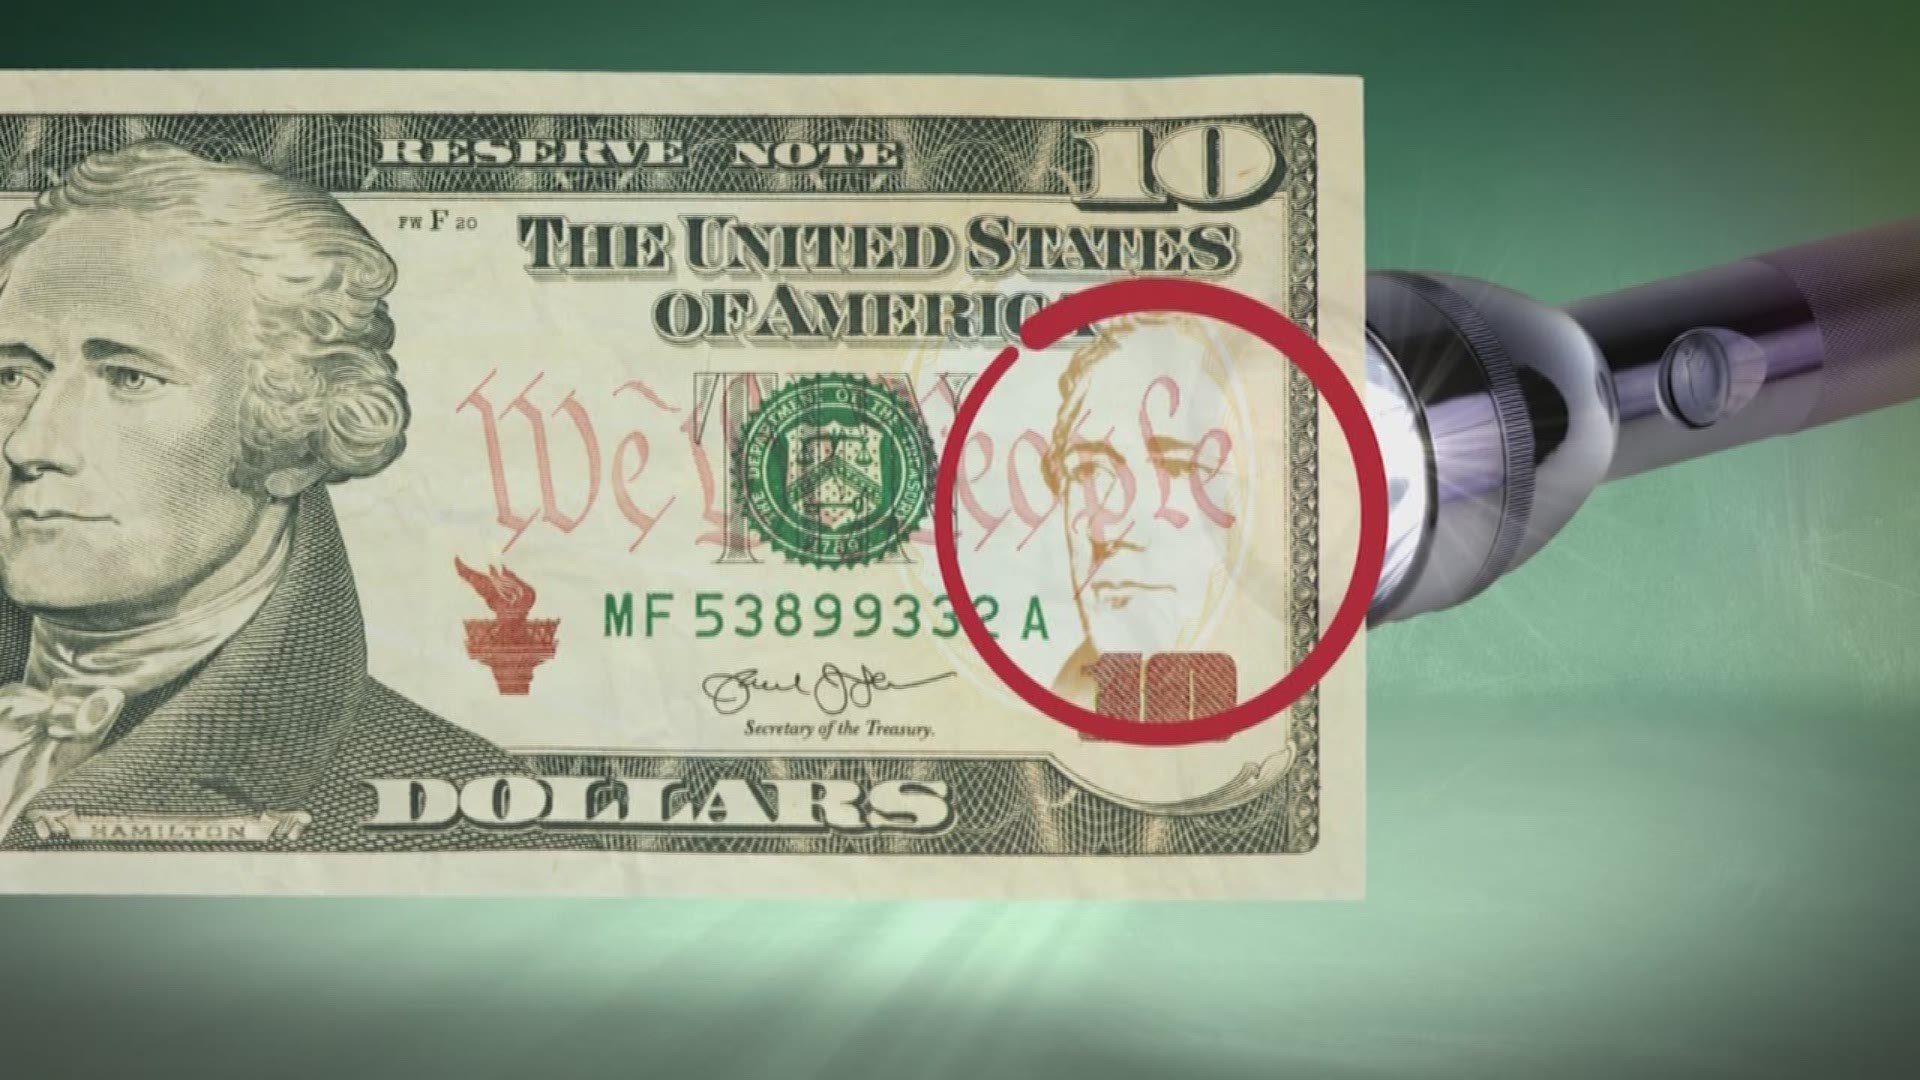 A fake $10 bill is now evidence in the felony forgery case that could land Syed Ali in jail for two to 10 years. After his story aired on KHOU 11 News, viewers wanted to know how they could avoid ending up in trouble like him.